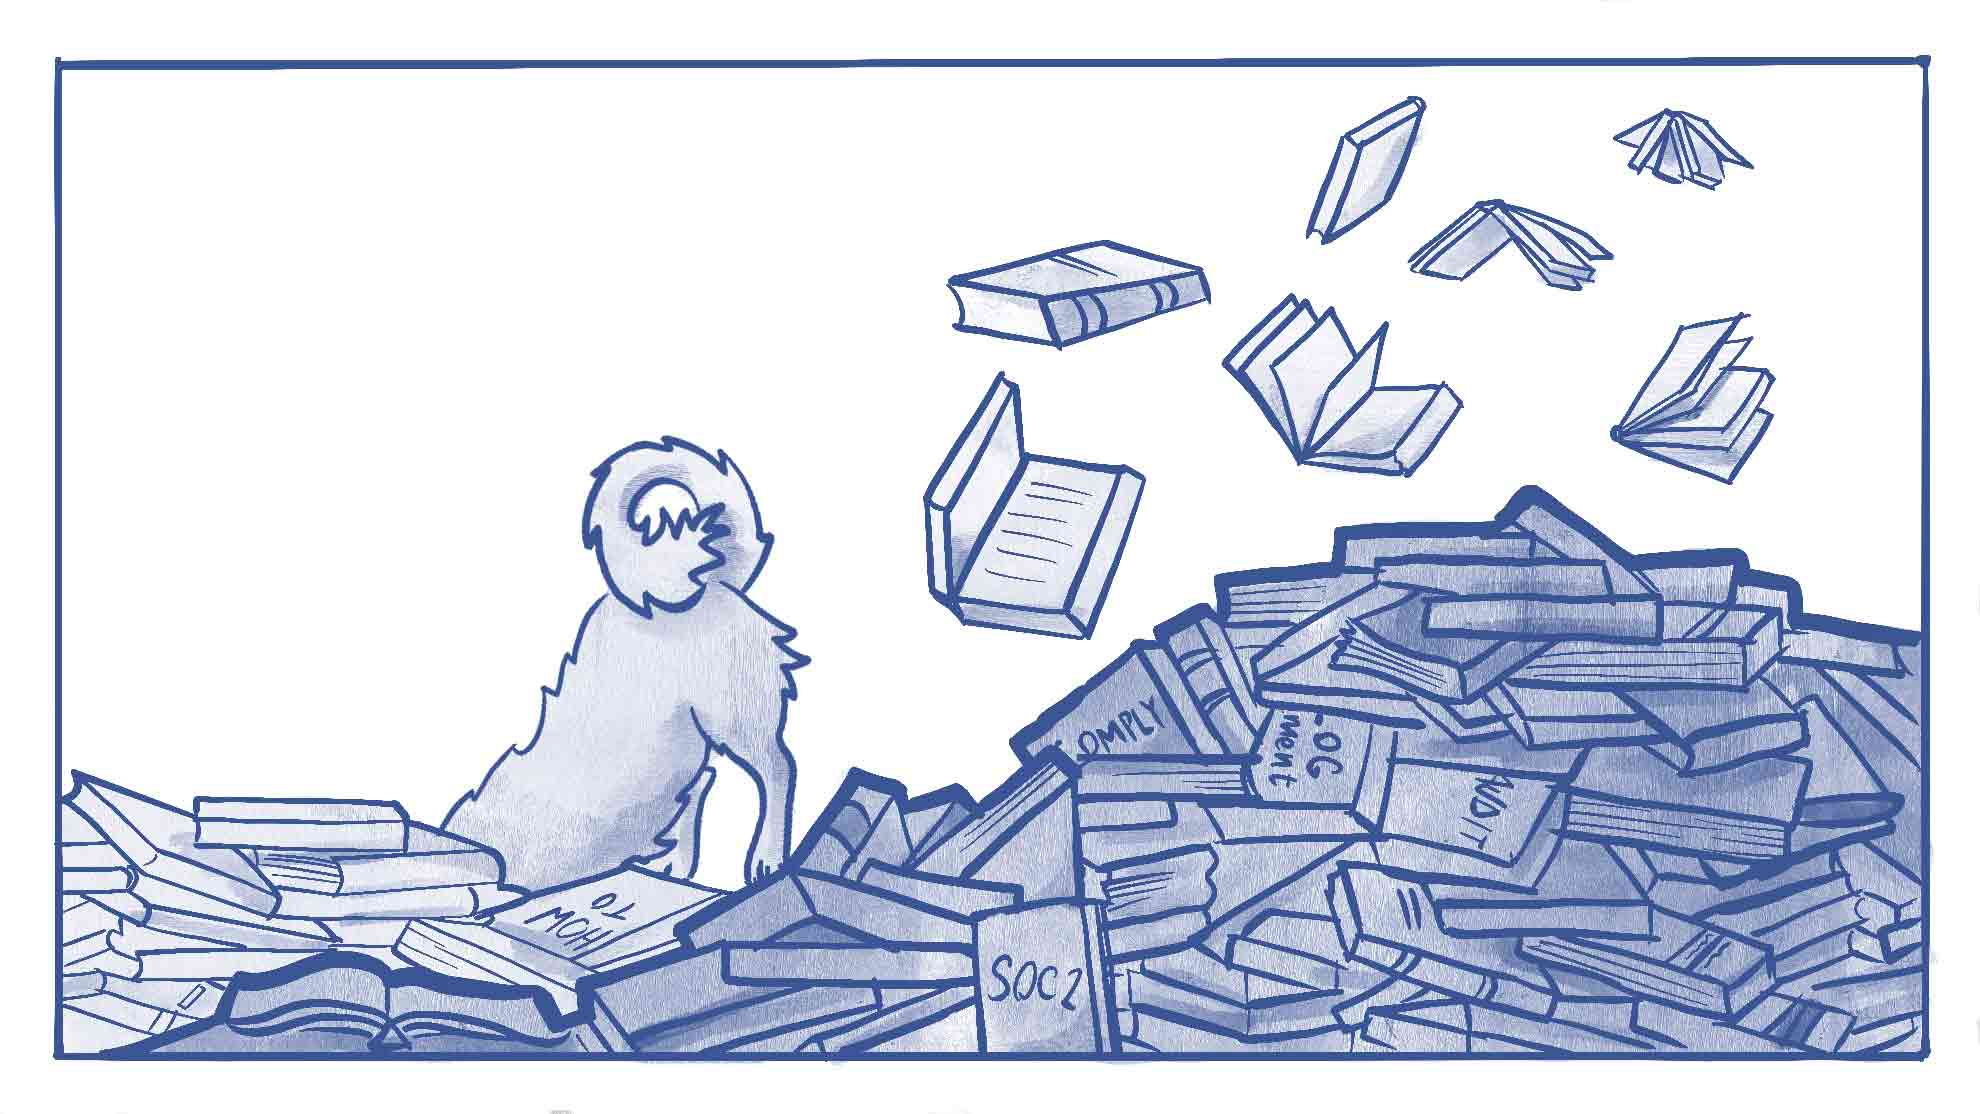 Illustration of a dog digging through a pile of SOC II books (resources)